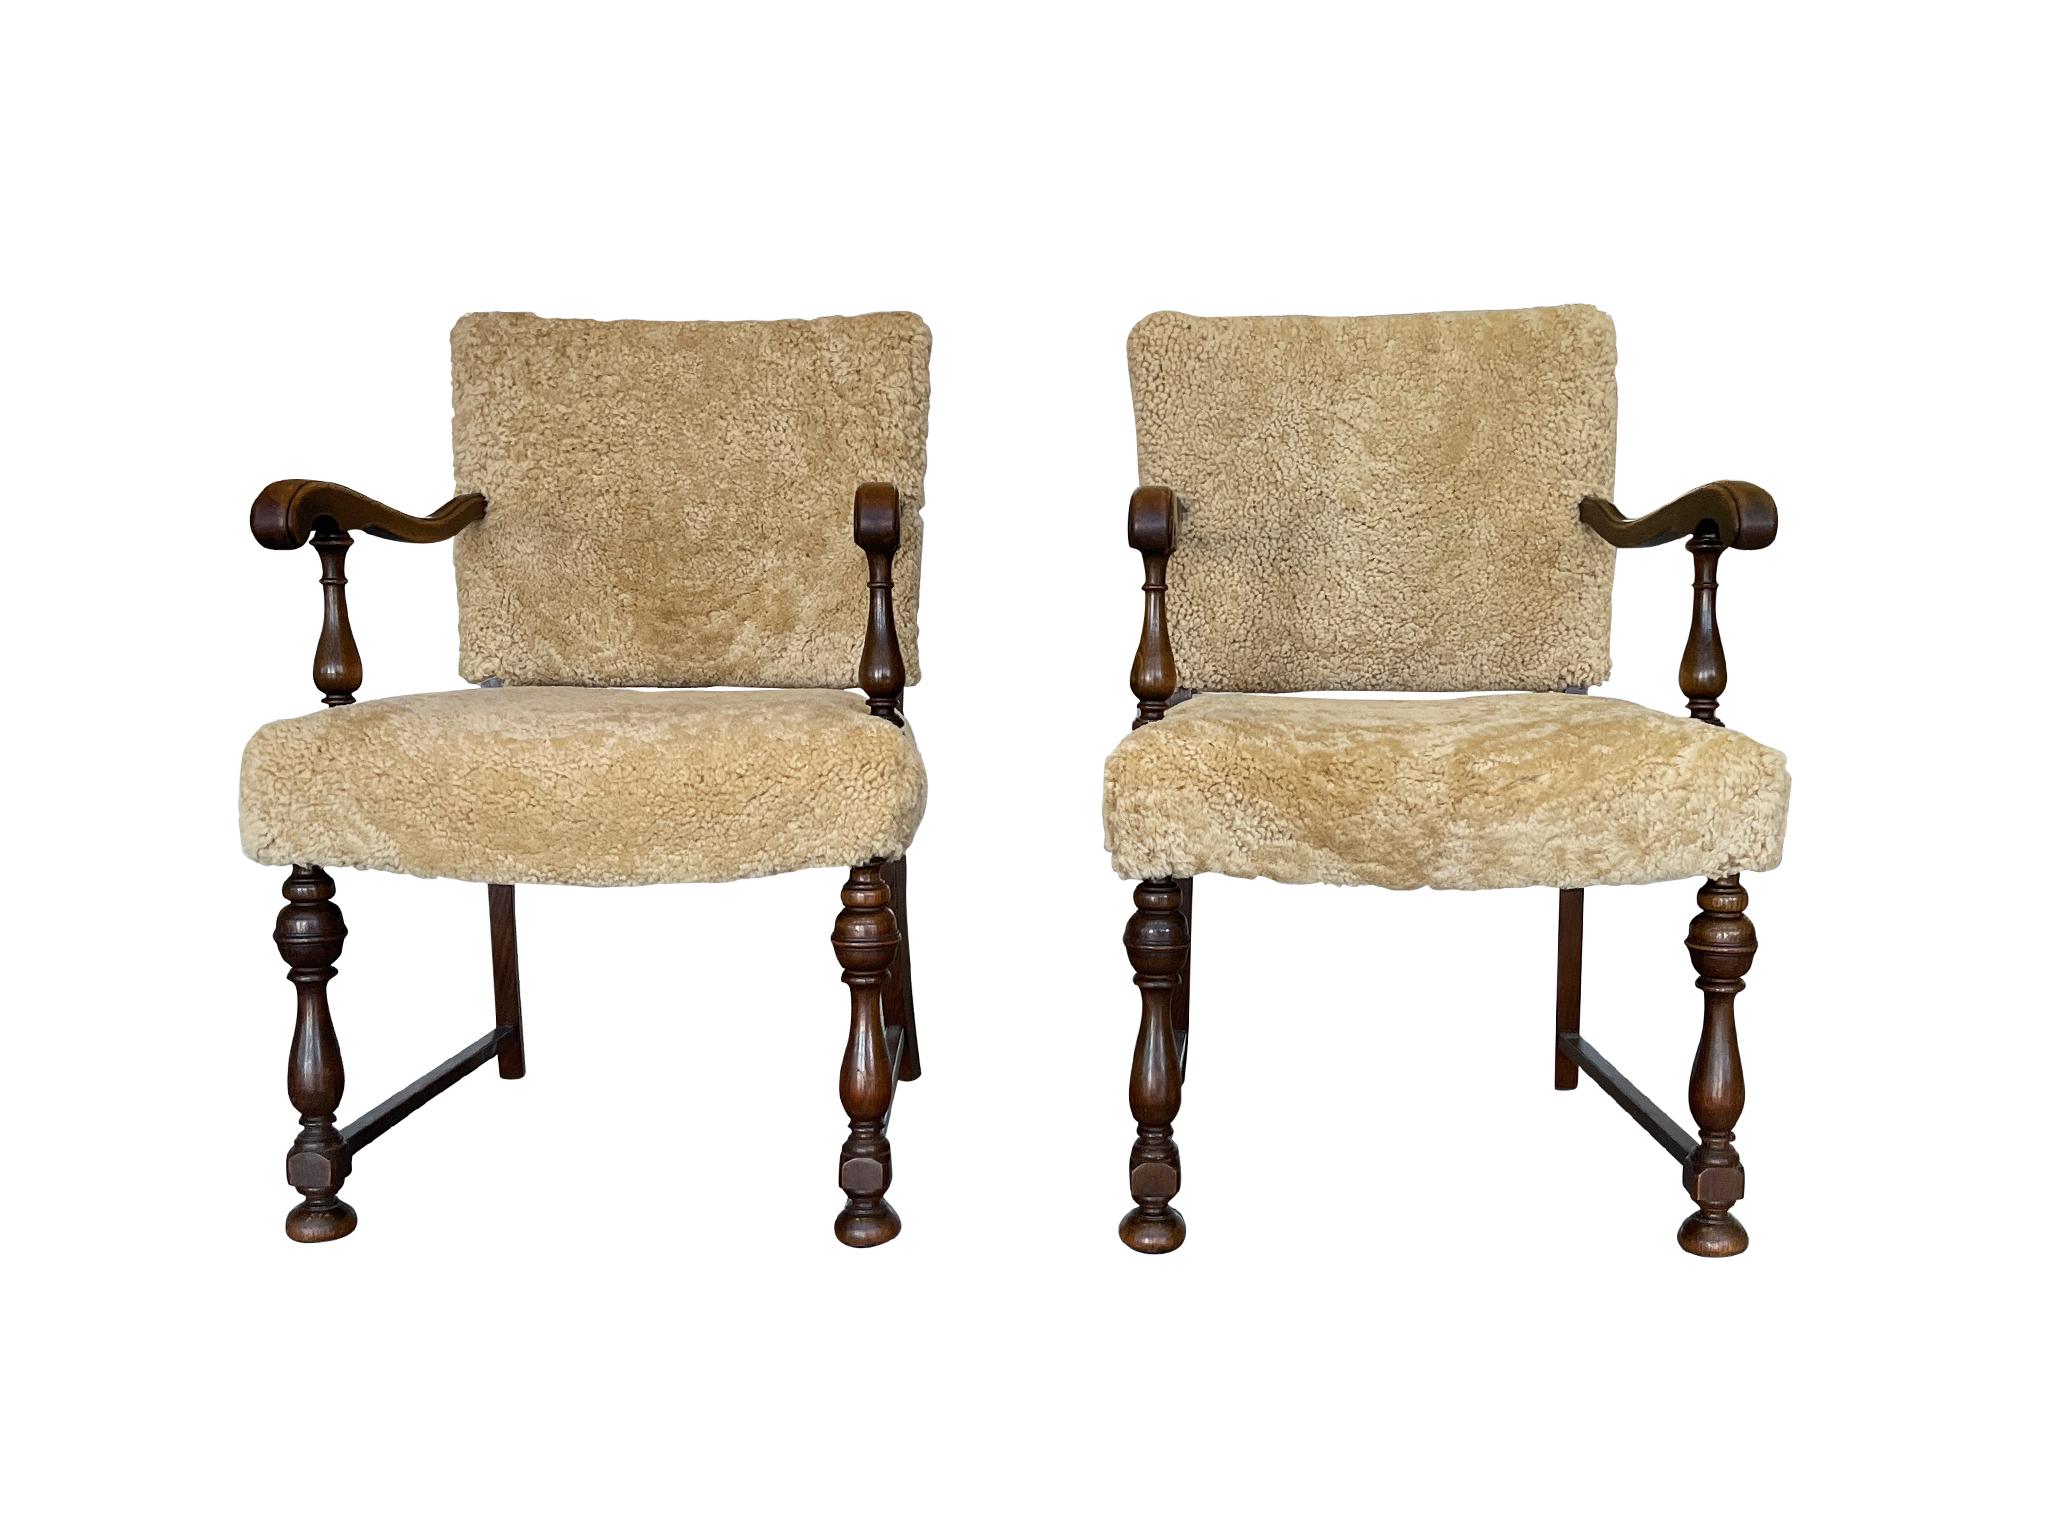 An elegant pair of Danish armchairs, hand-crafted in the 1930s from oak wood and newly reupholstered in a cozy shearling from Skandilock. The oak has a warm, reddish-brown tone that's complemented beautifully by the shearling. Structurally, the